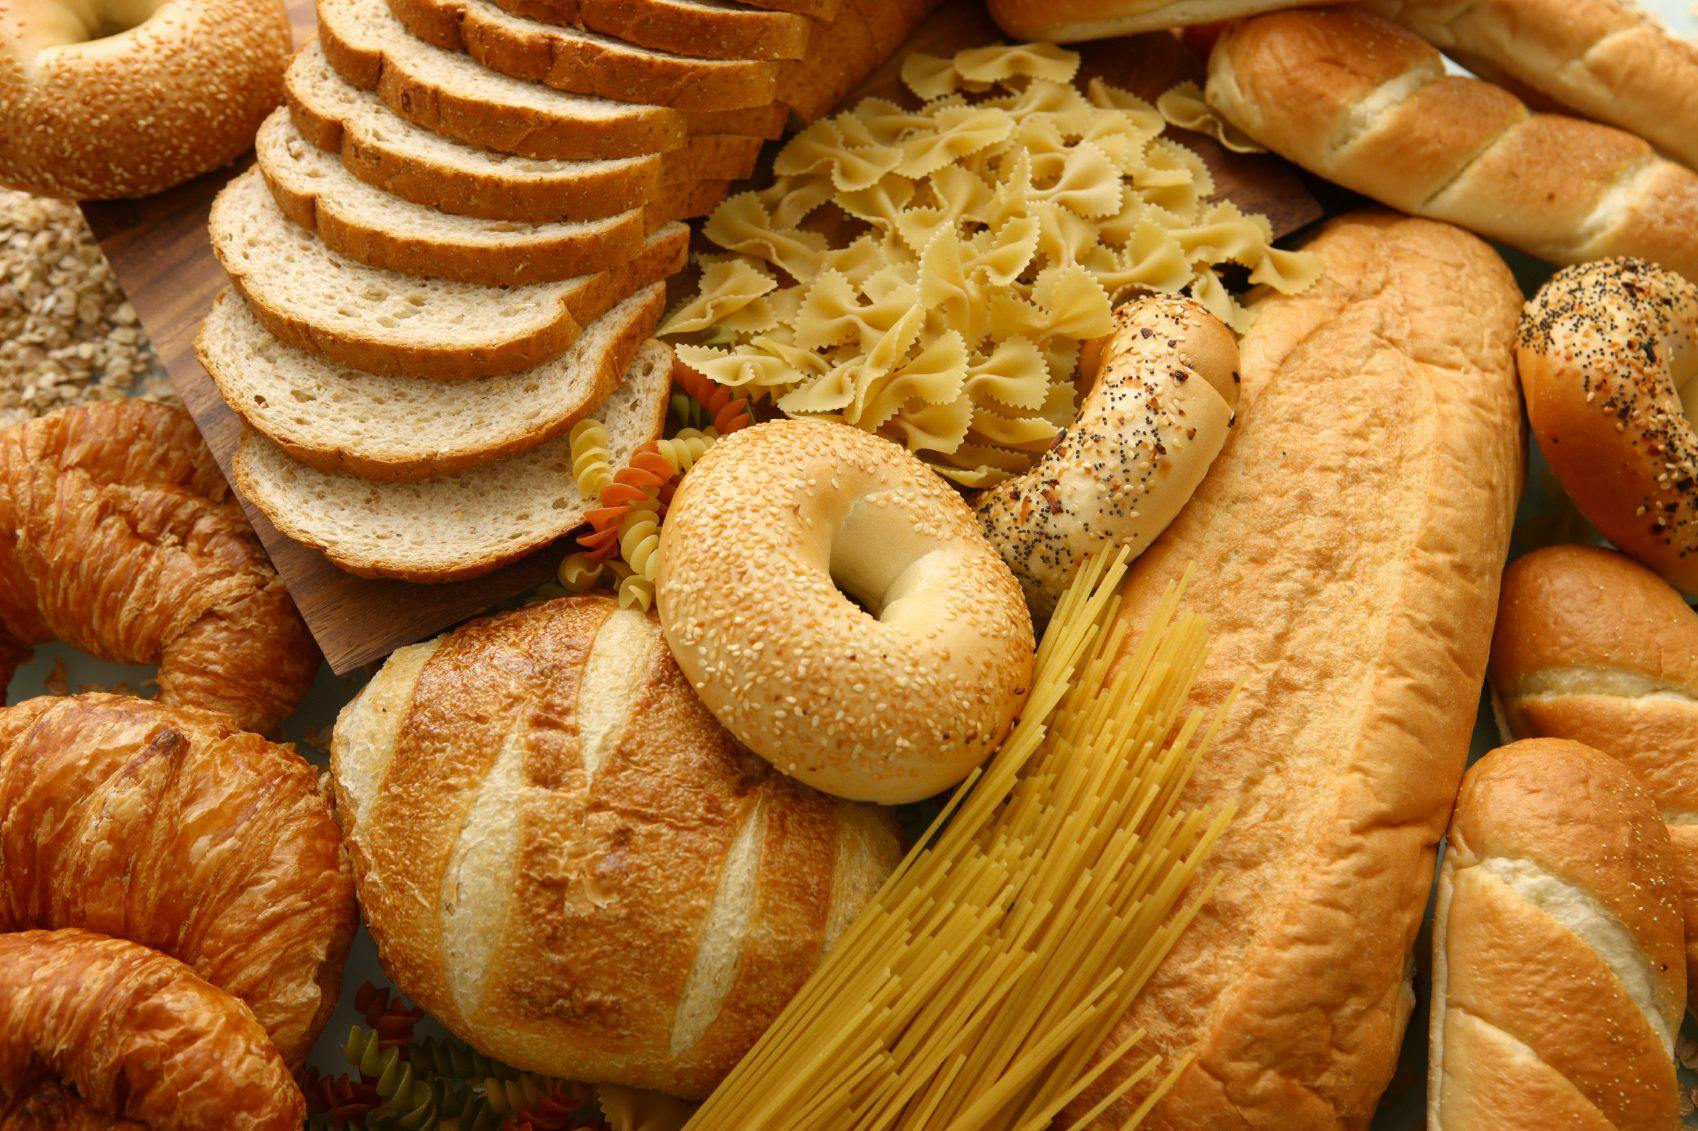 Carbohydrate Consumption Contributes to Total Mortality, New Study Suggests